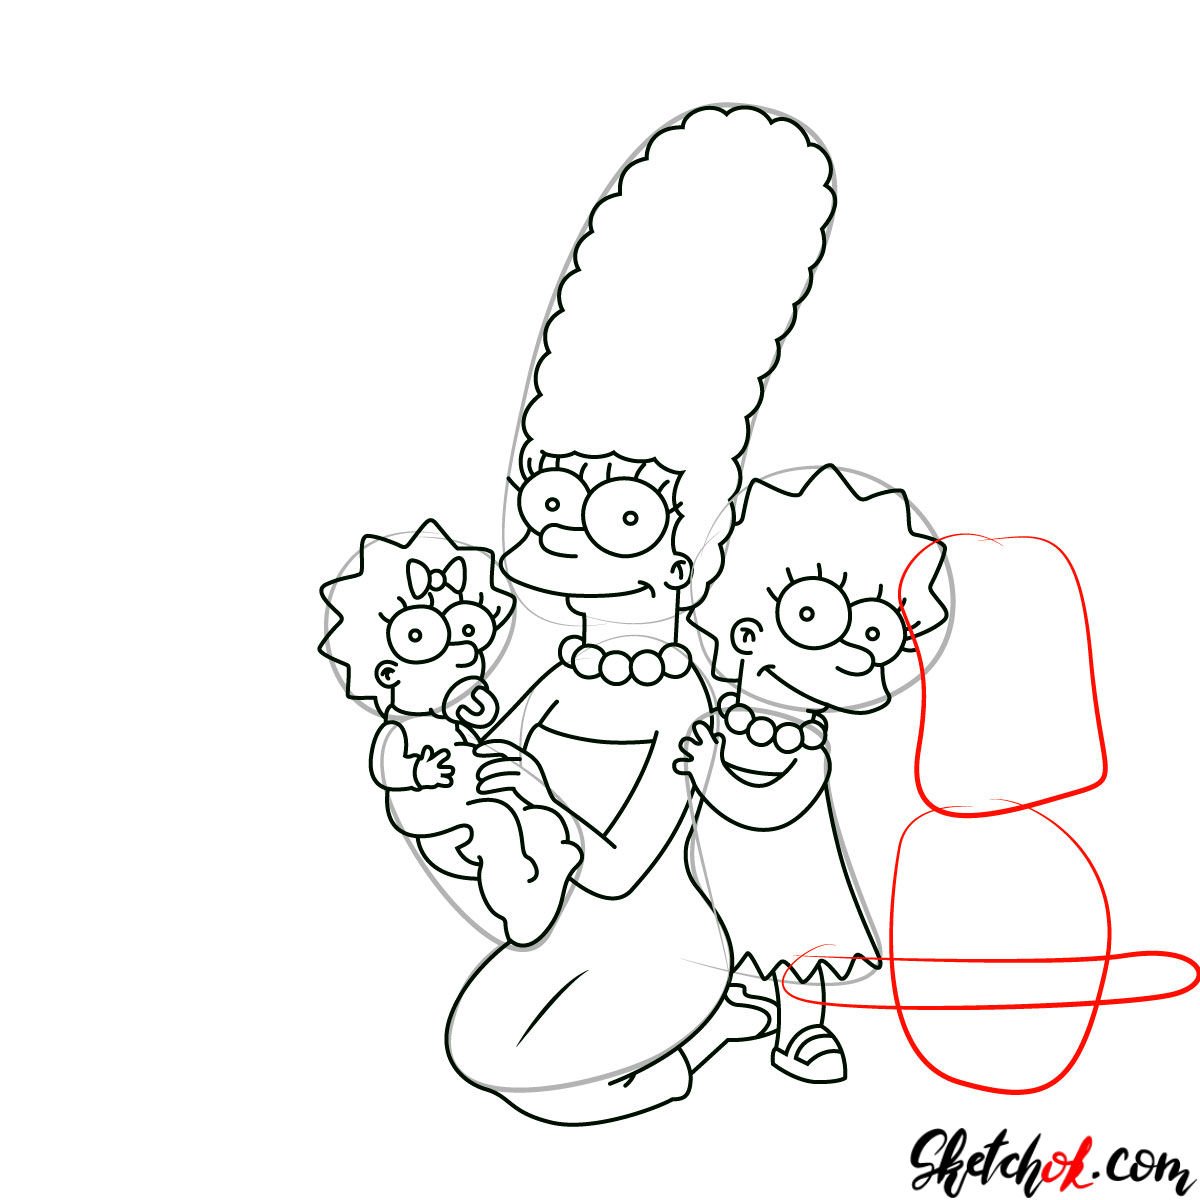 How to draw the Simpsons Family - step 15